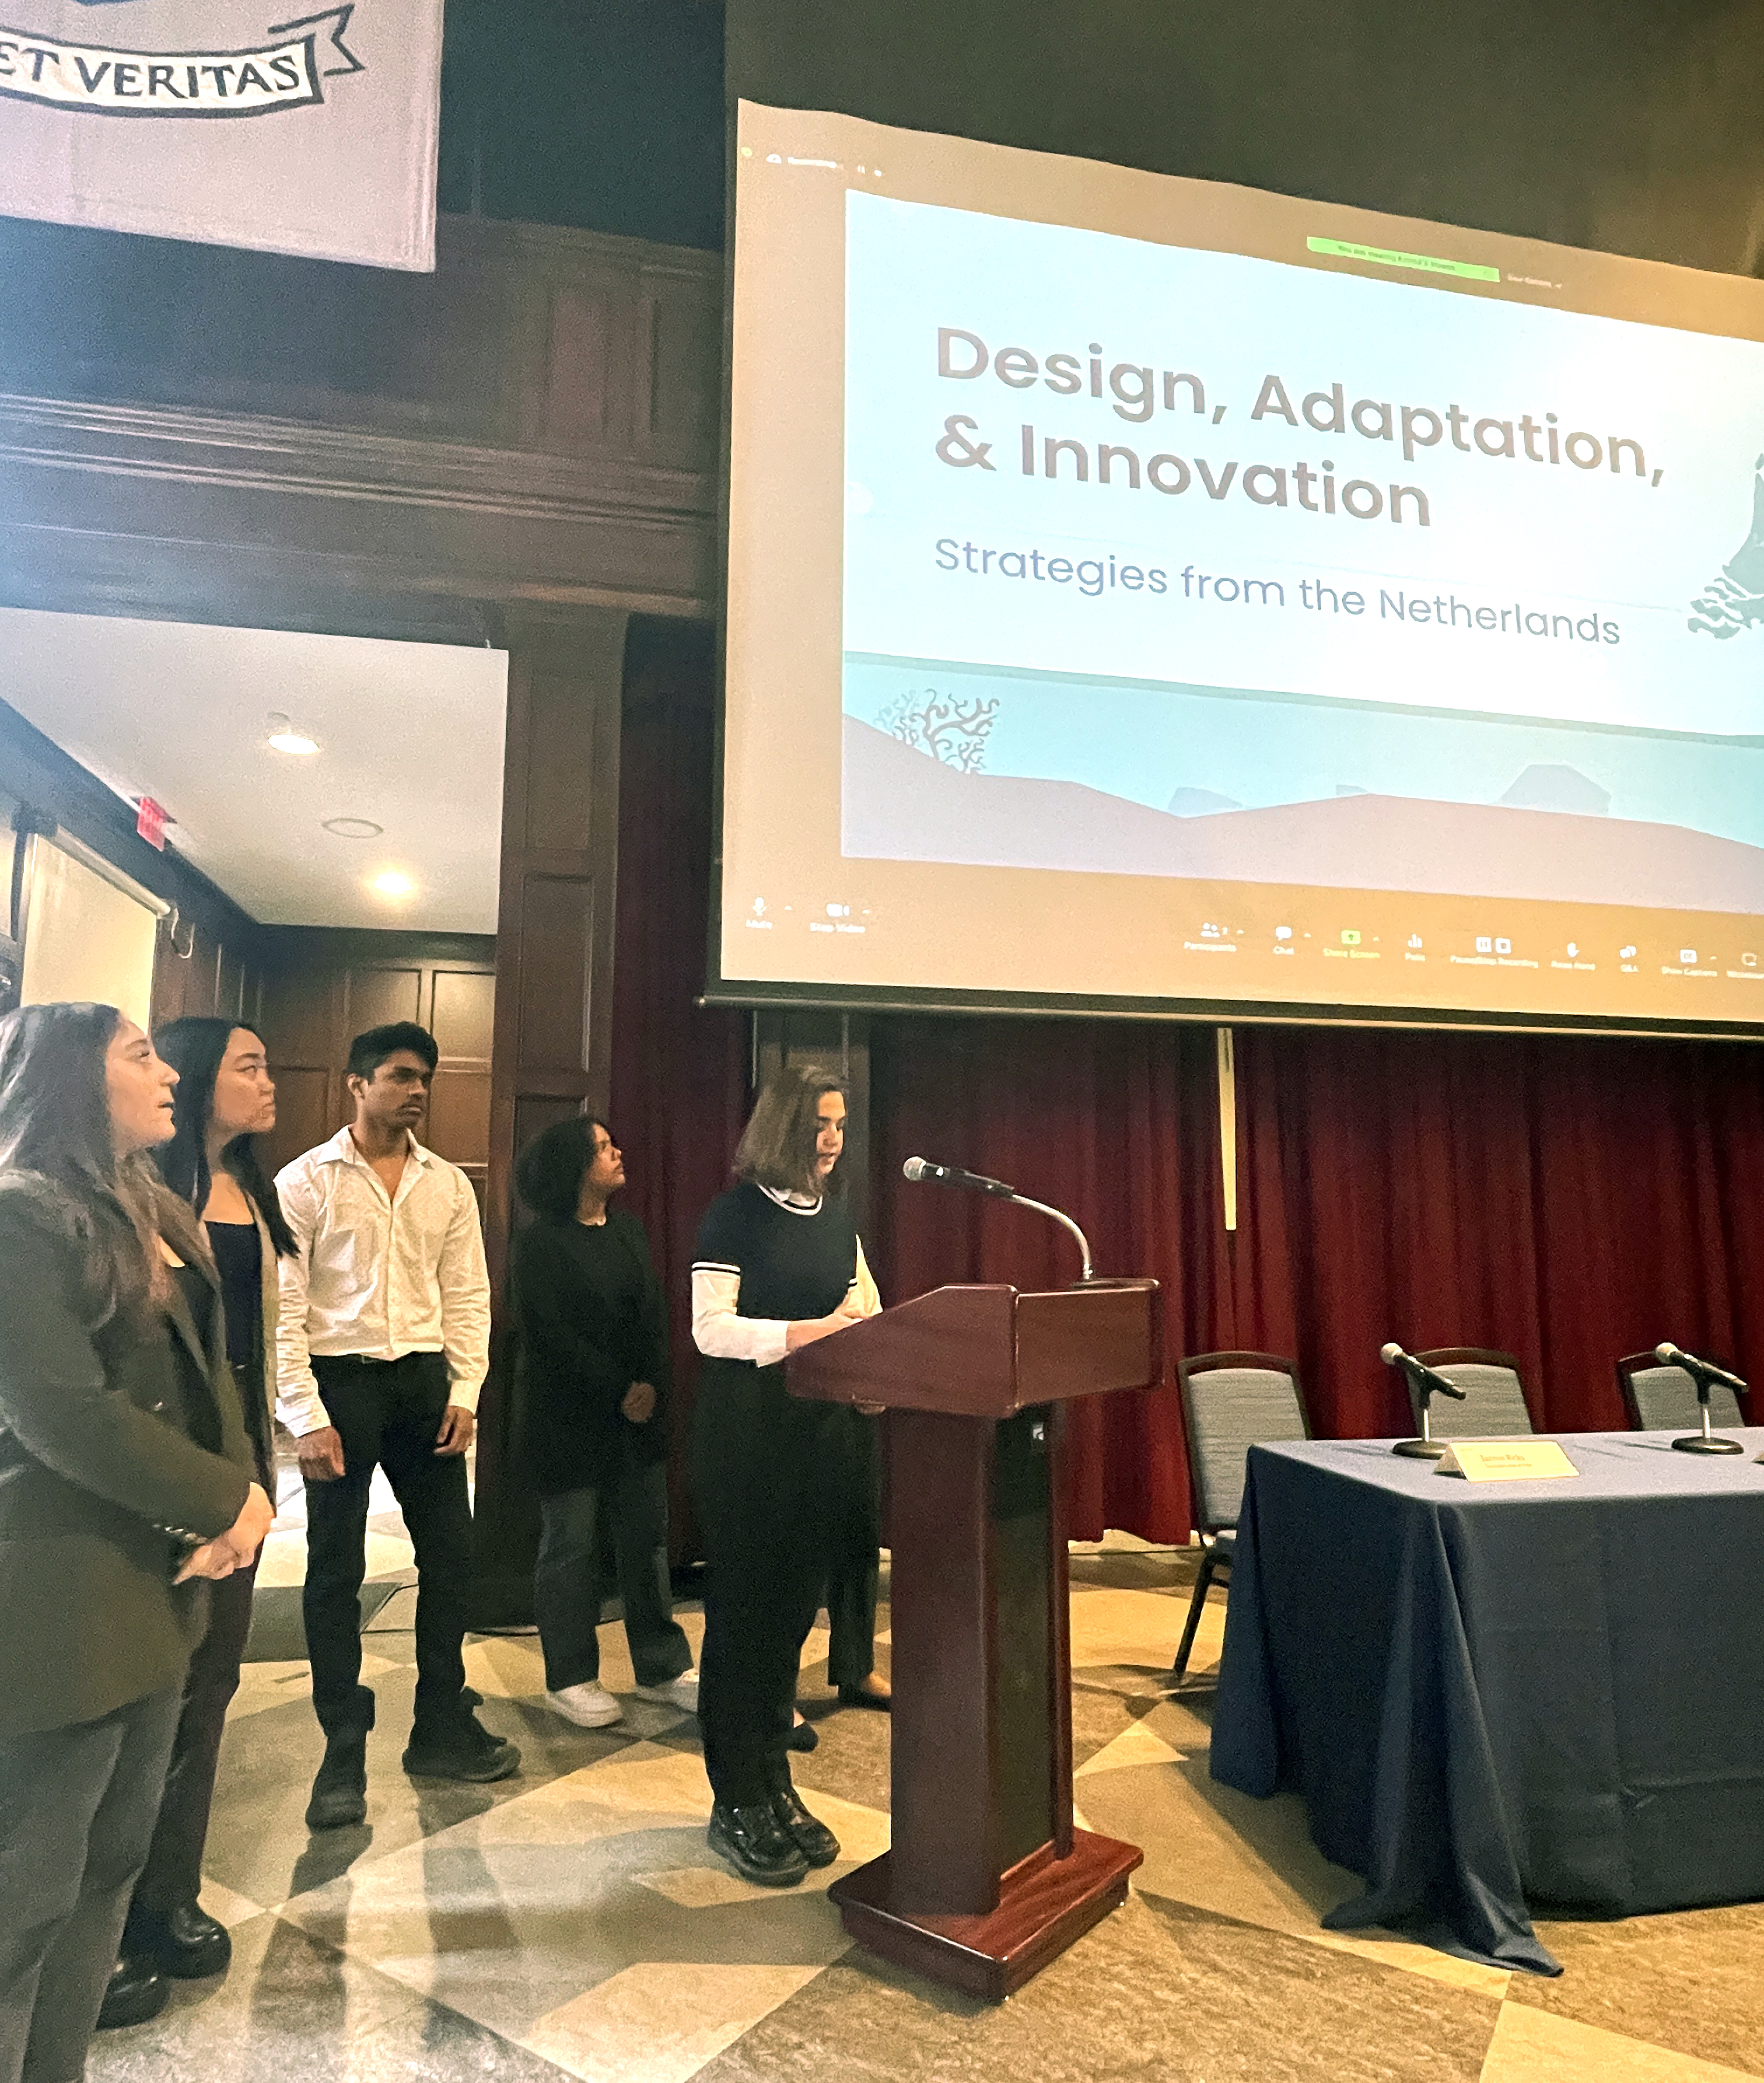 Students give a presentation at a podium titled Design, Adaptation, and Innovation: Strategies from the Netherlands